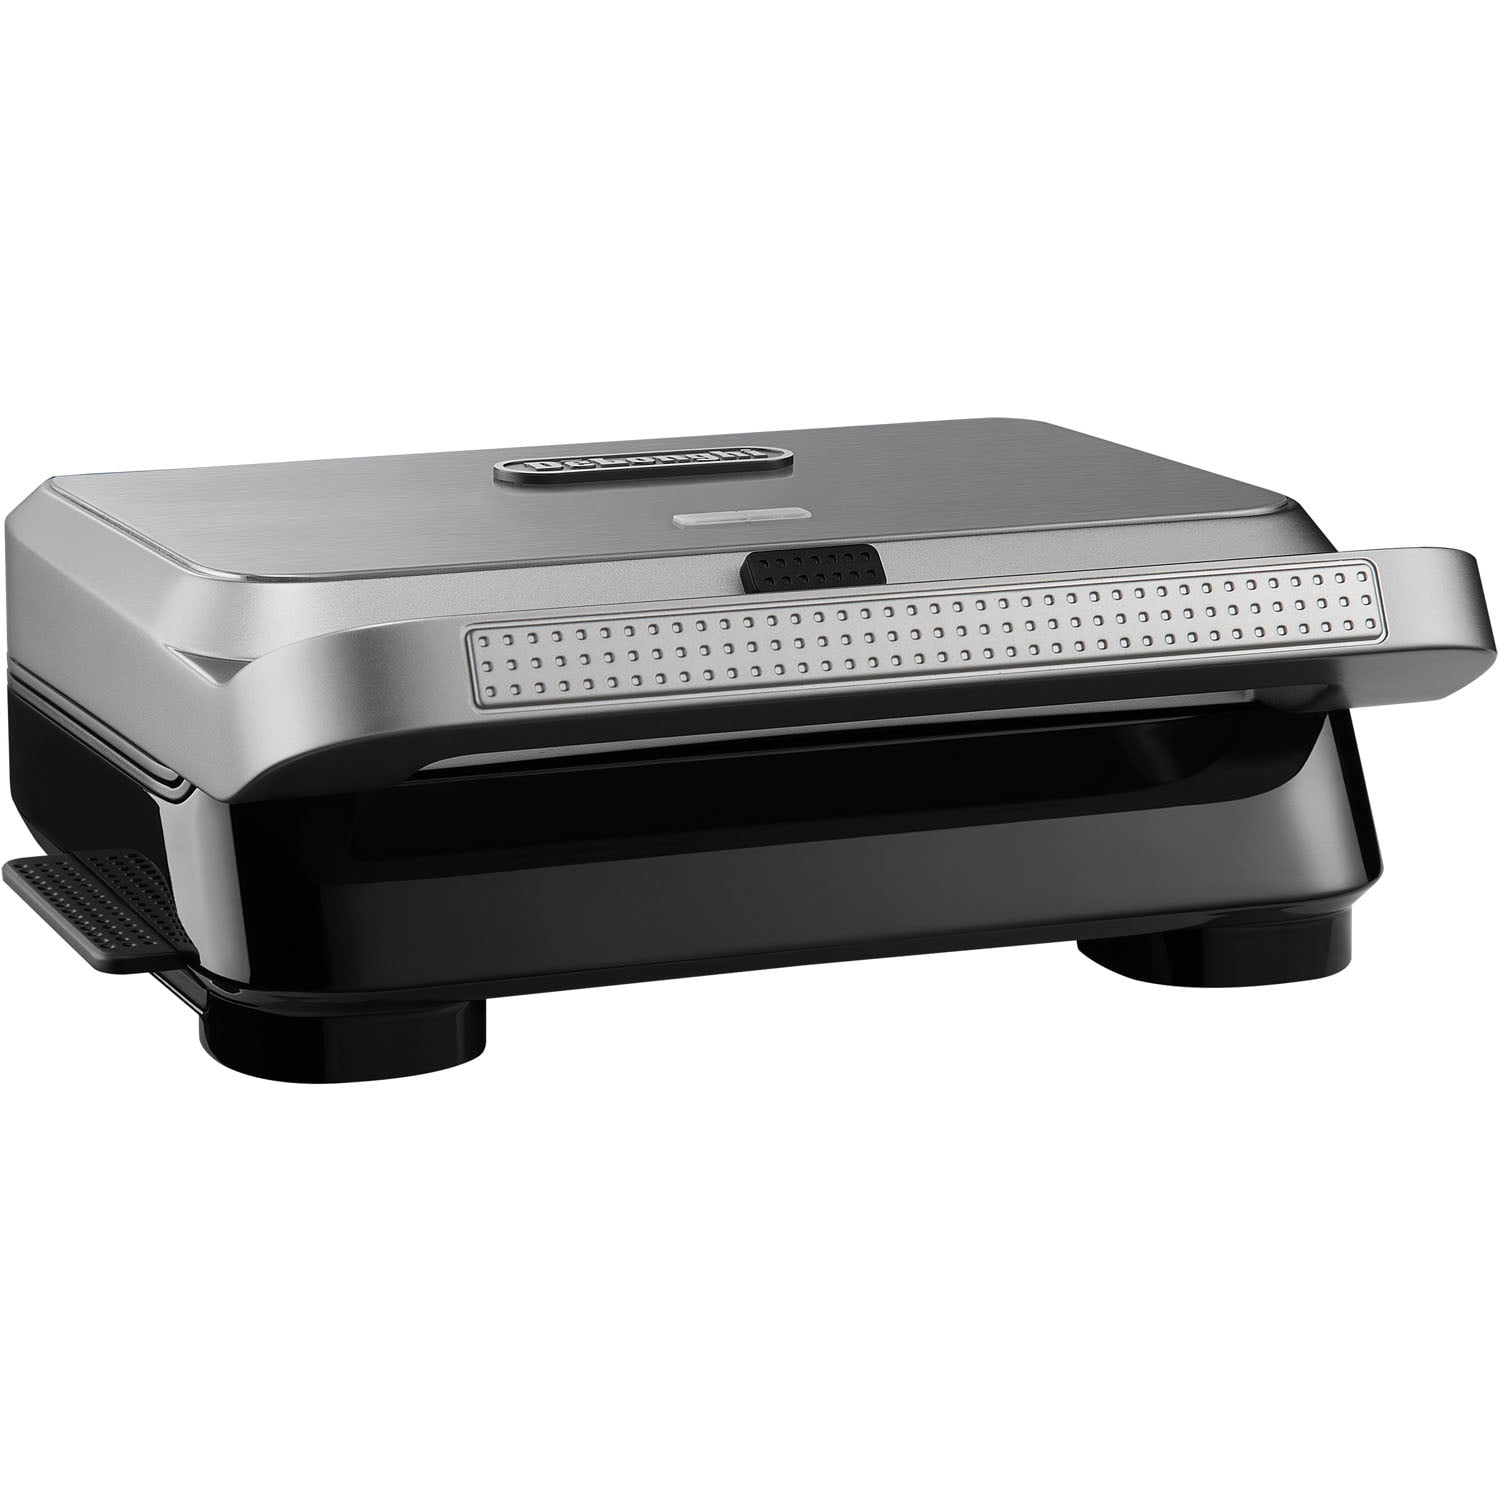 DeLonghi BG 500 C barbecue - barbecues & grills (Tabletop, Black, Stainless  steel, Rectang